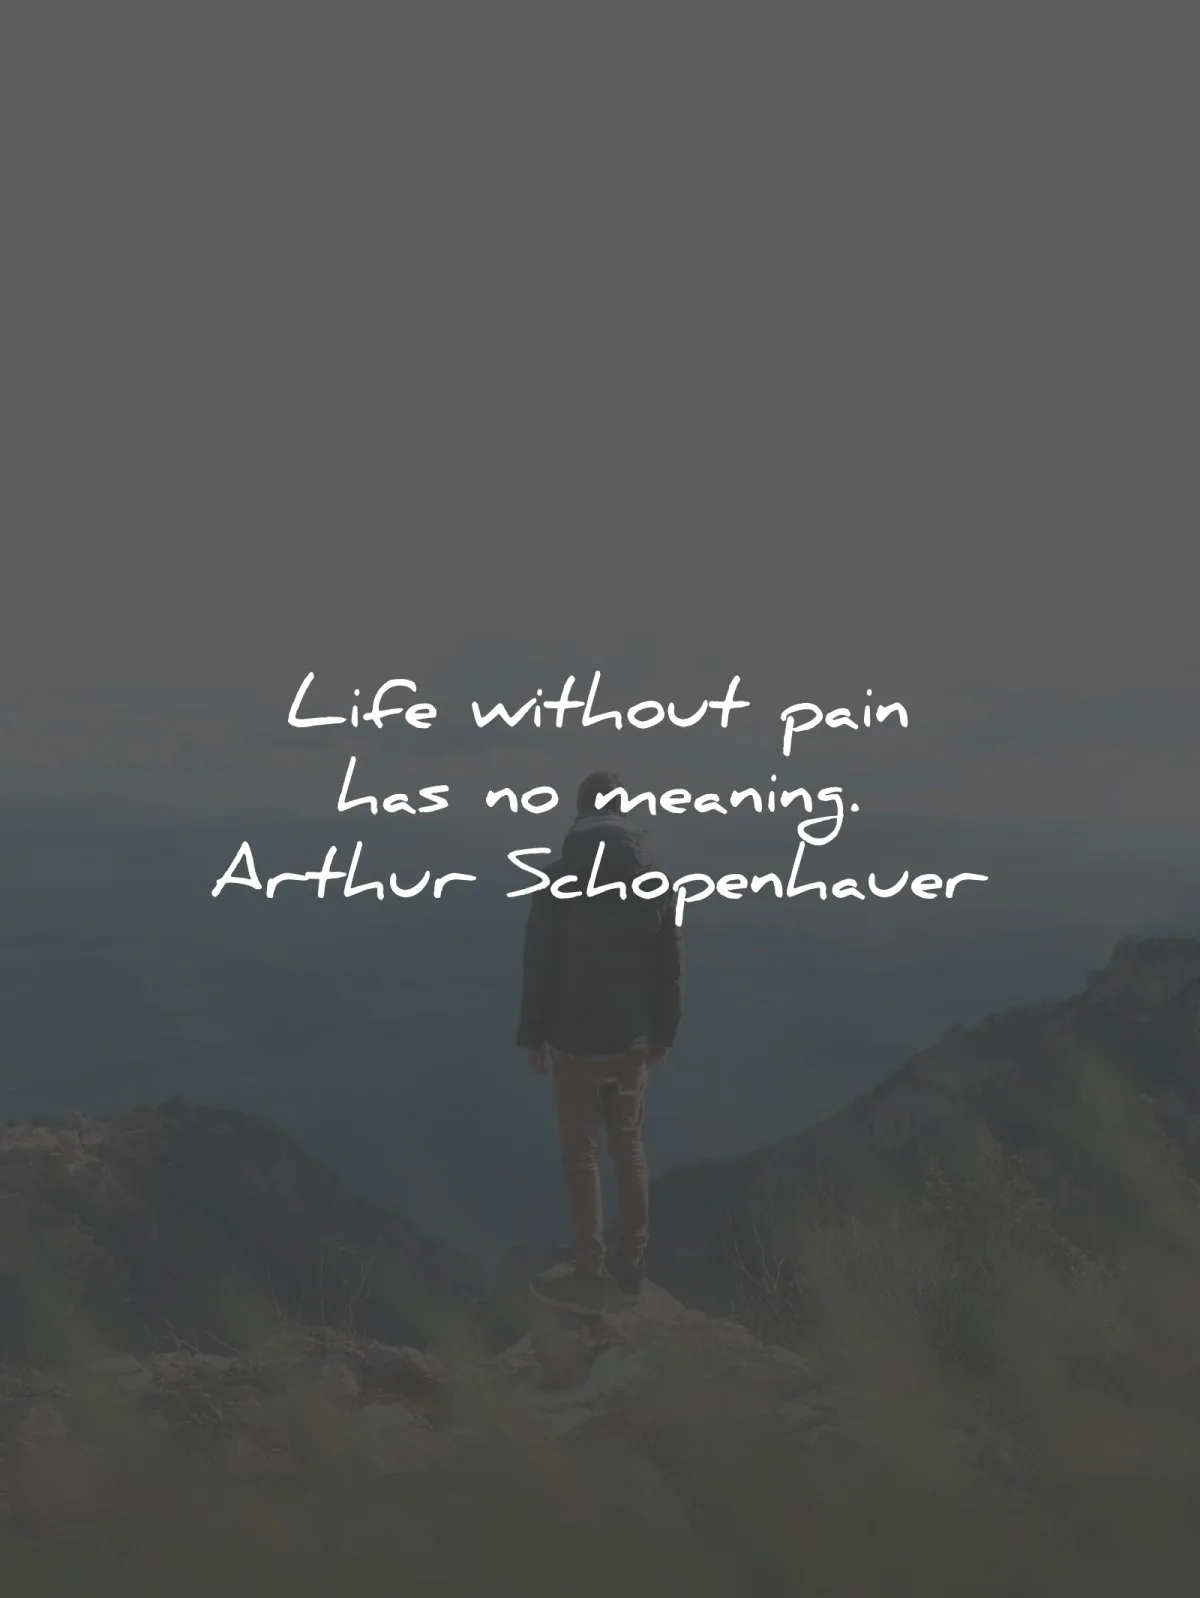 arthur schopenhauer quotes life without pain meaning wisdom